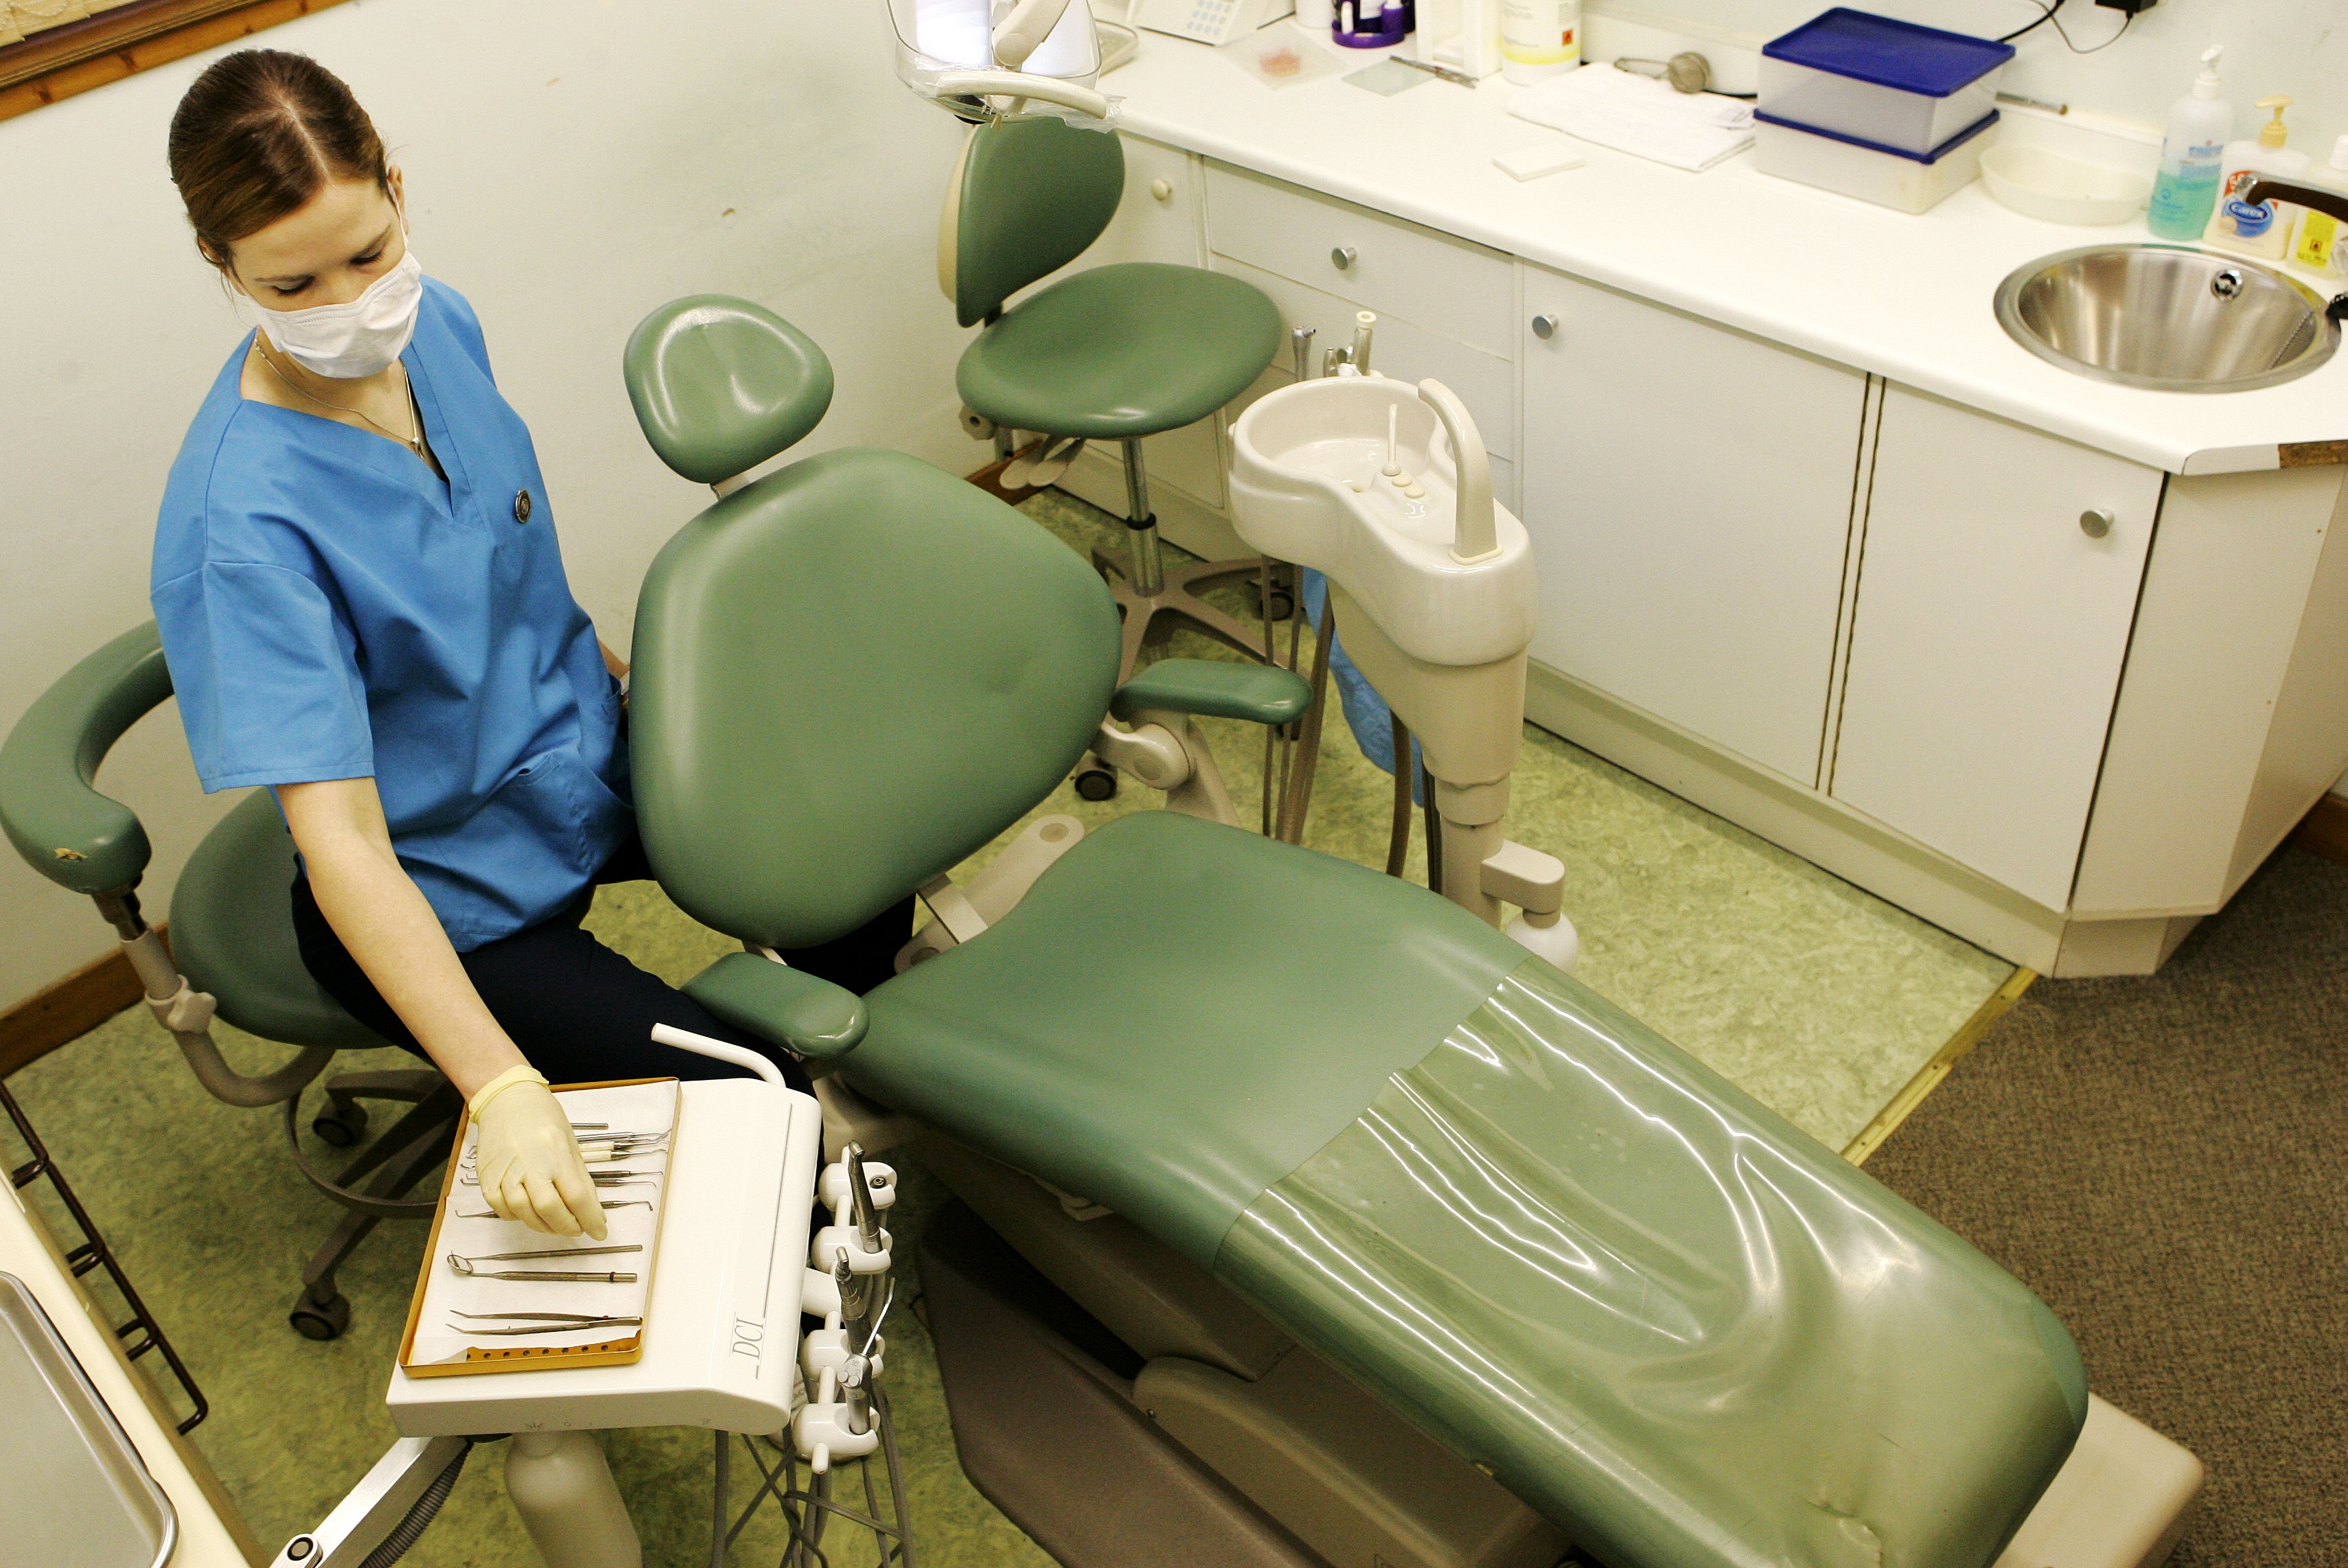 Nine in 10 NHS dental practices across the UK are not accepting new adult patients for treatment, according to a survey